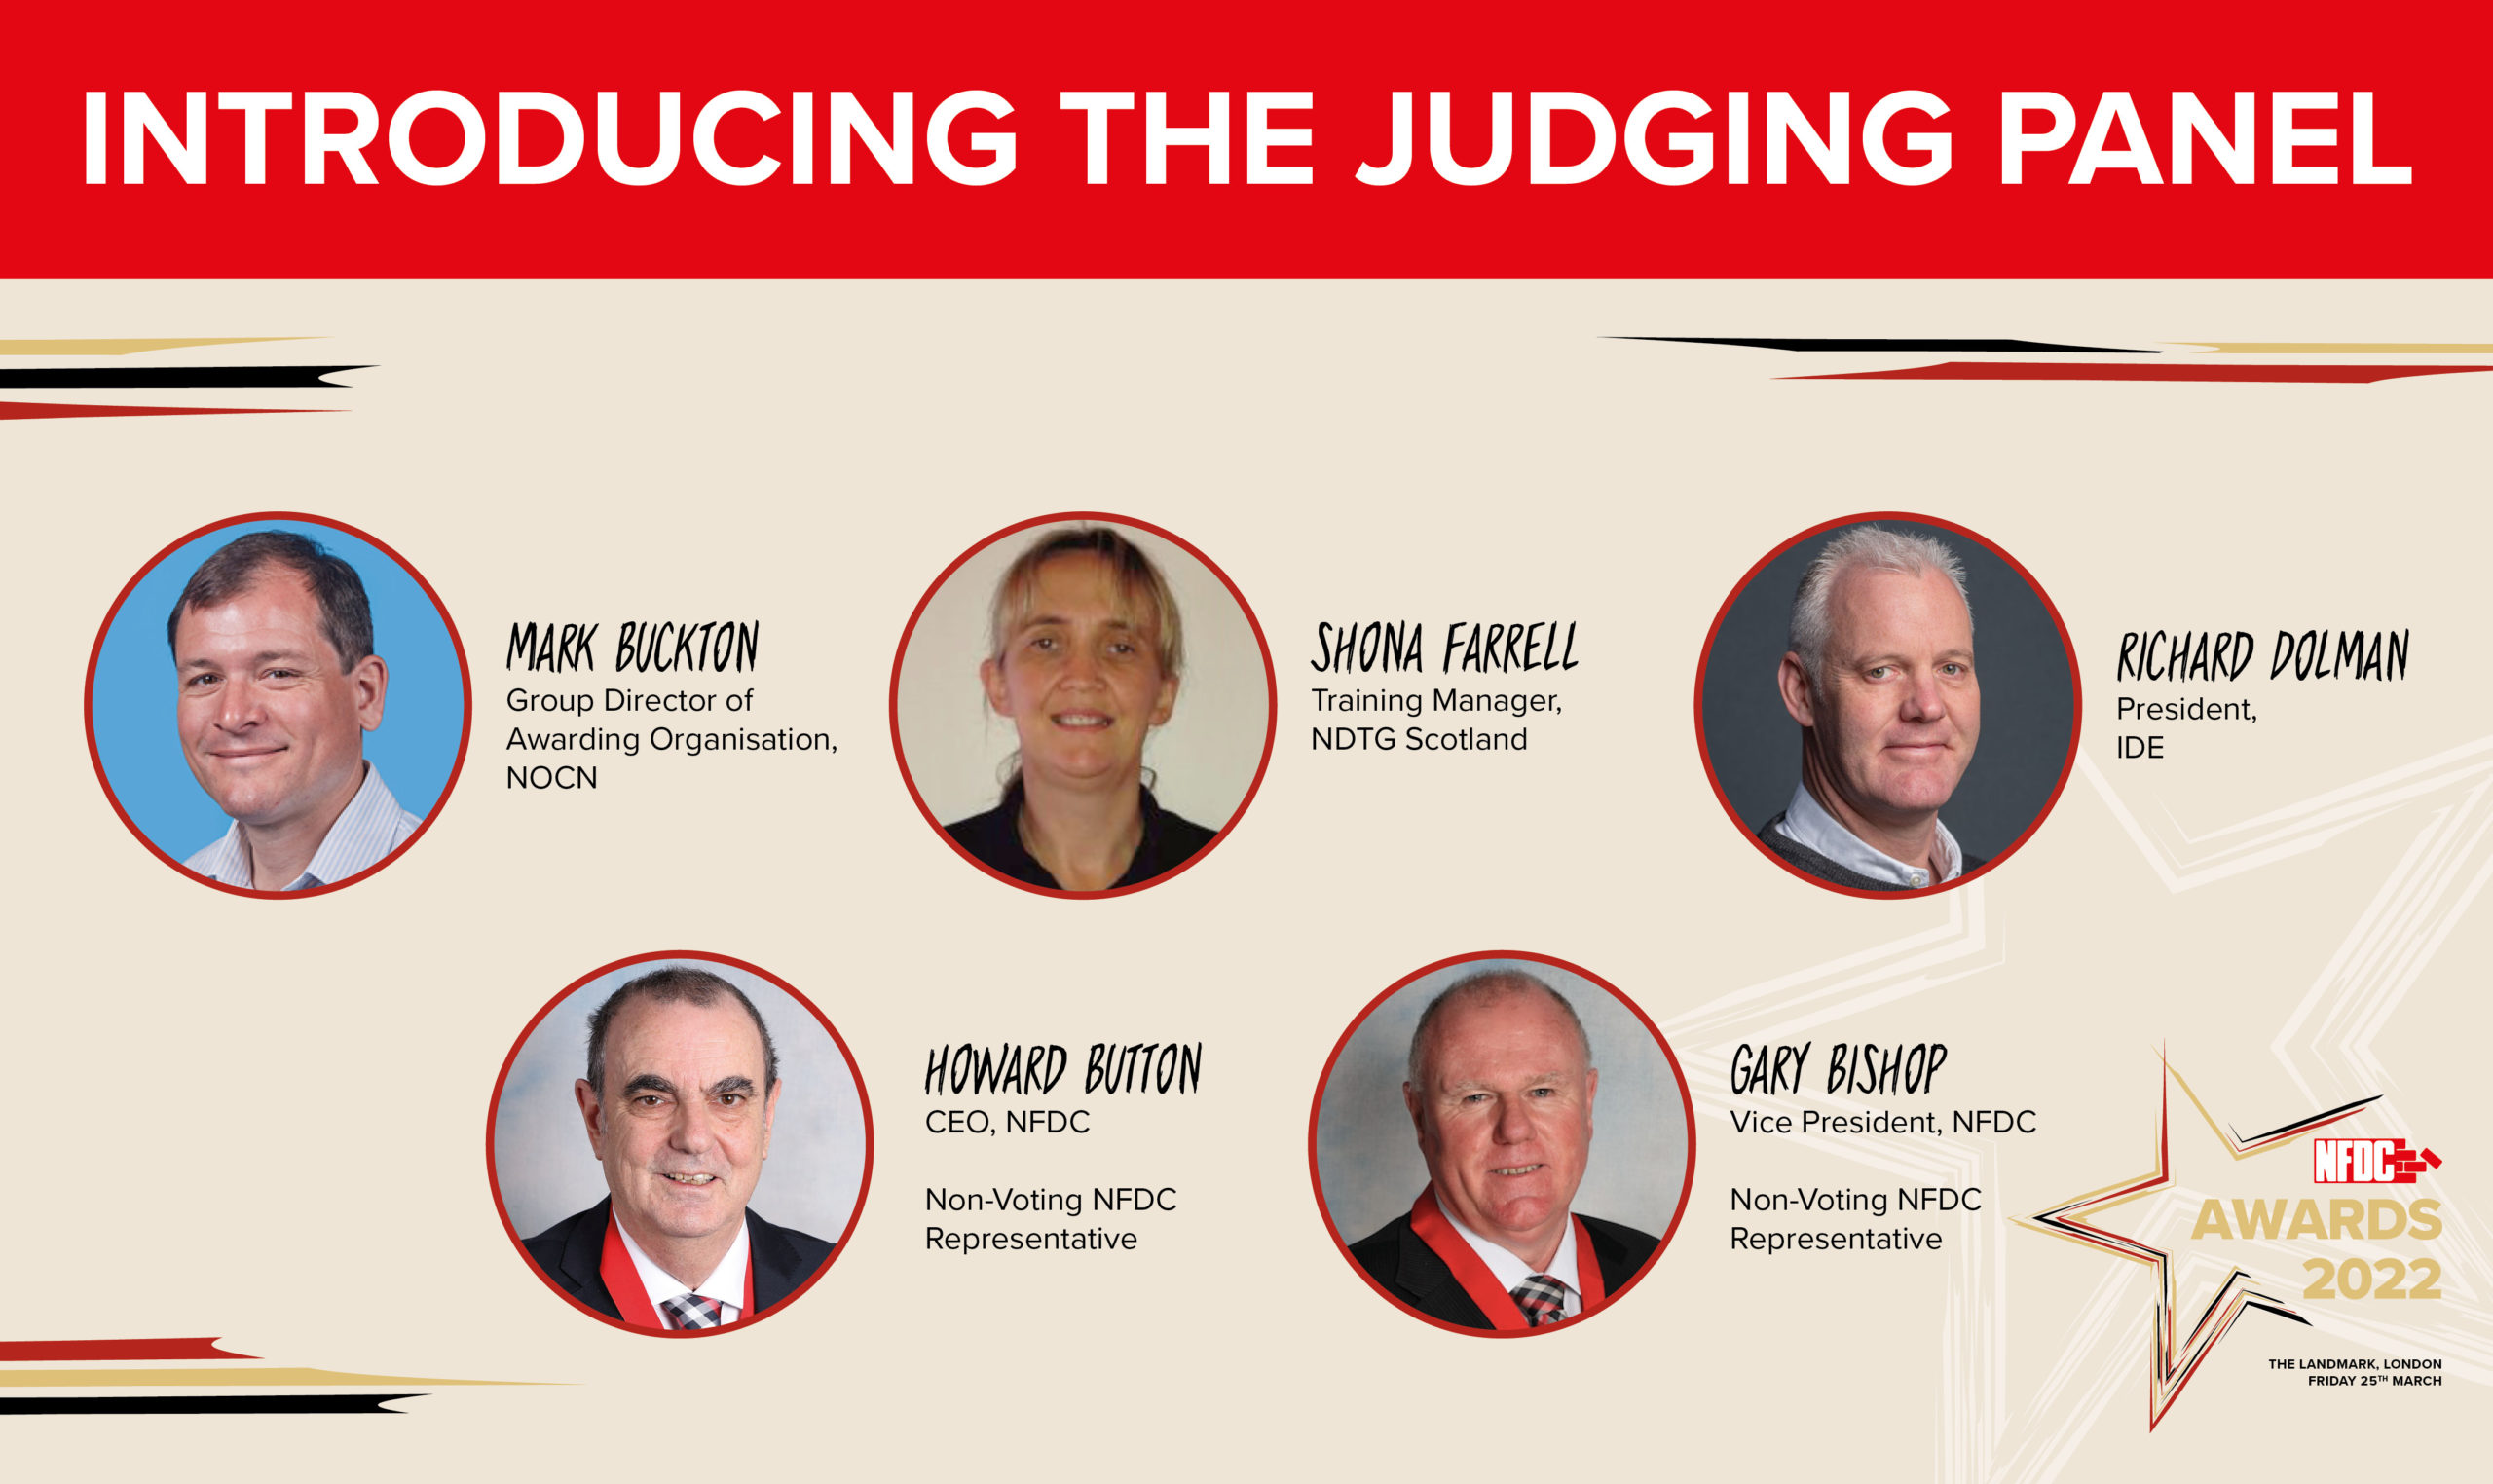 NFDC Awards 2022 – Introducing the Judging Panel